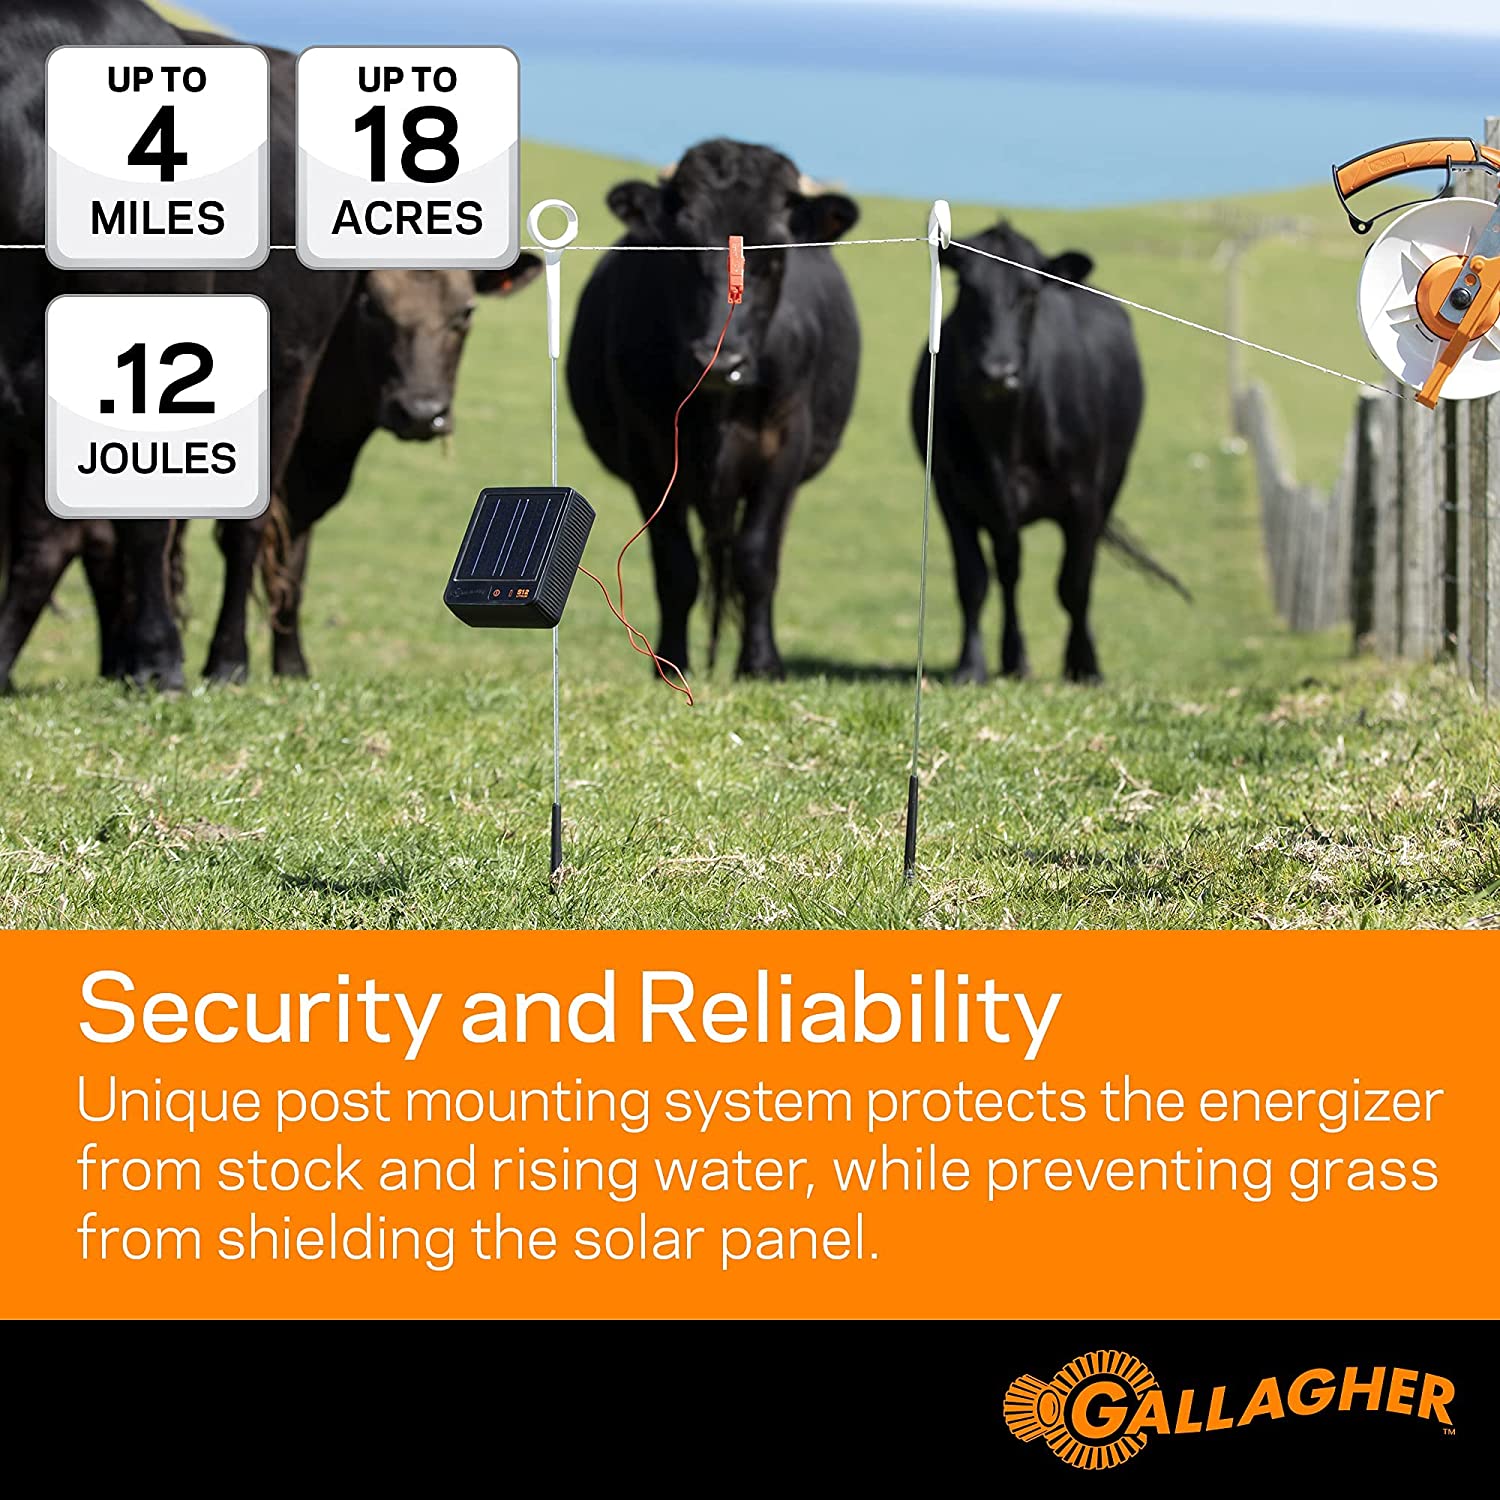 Gallagher S12 Solar Electric Fence Charger | Powers Up to 4 Miles / 18 Acres of Fence | Solar Lithium Technology, 0.12 Stored Joule Energizer | Built-in Earthing | Portable and Super Tough